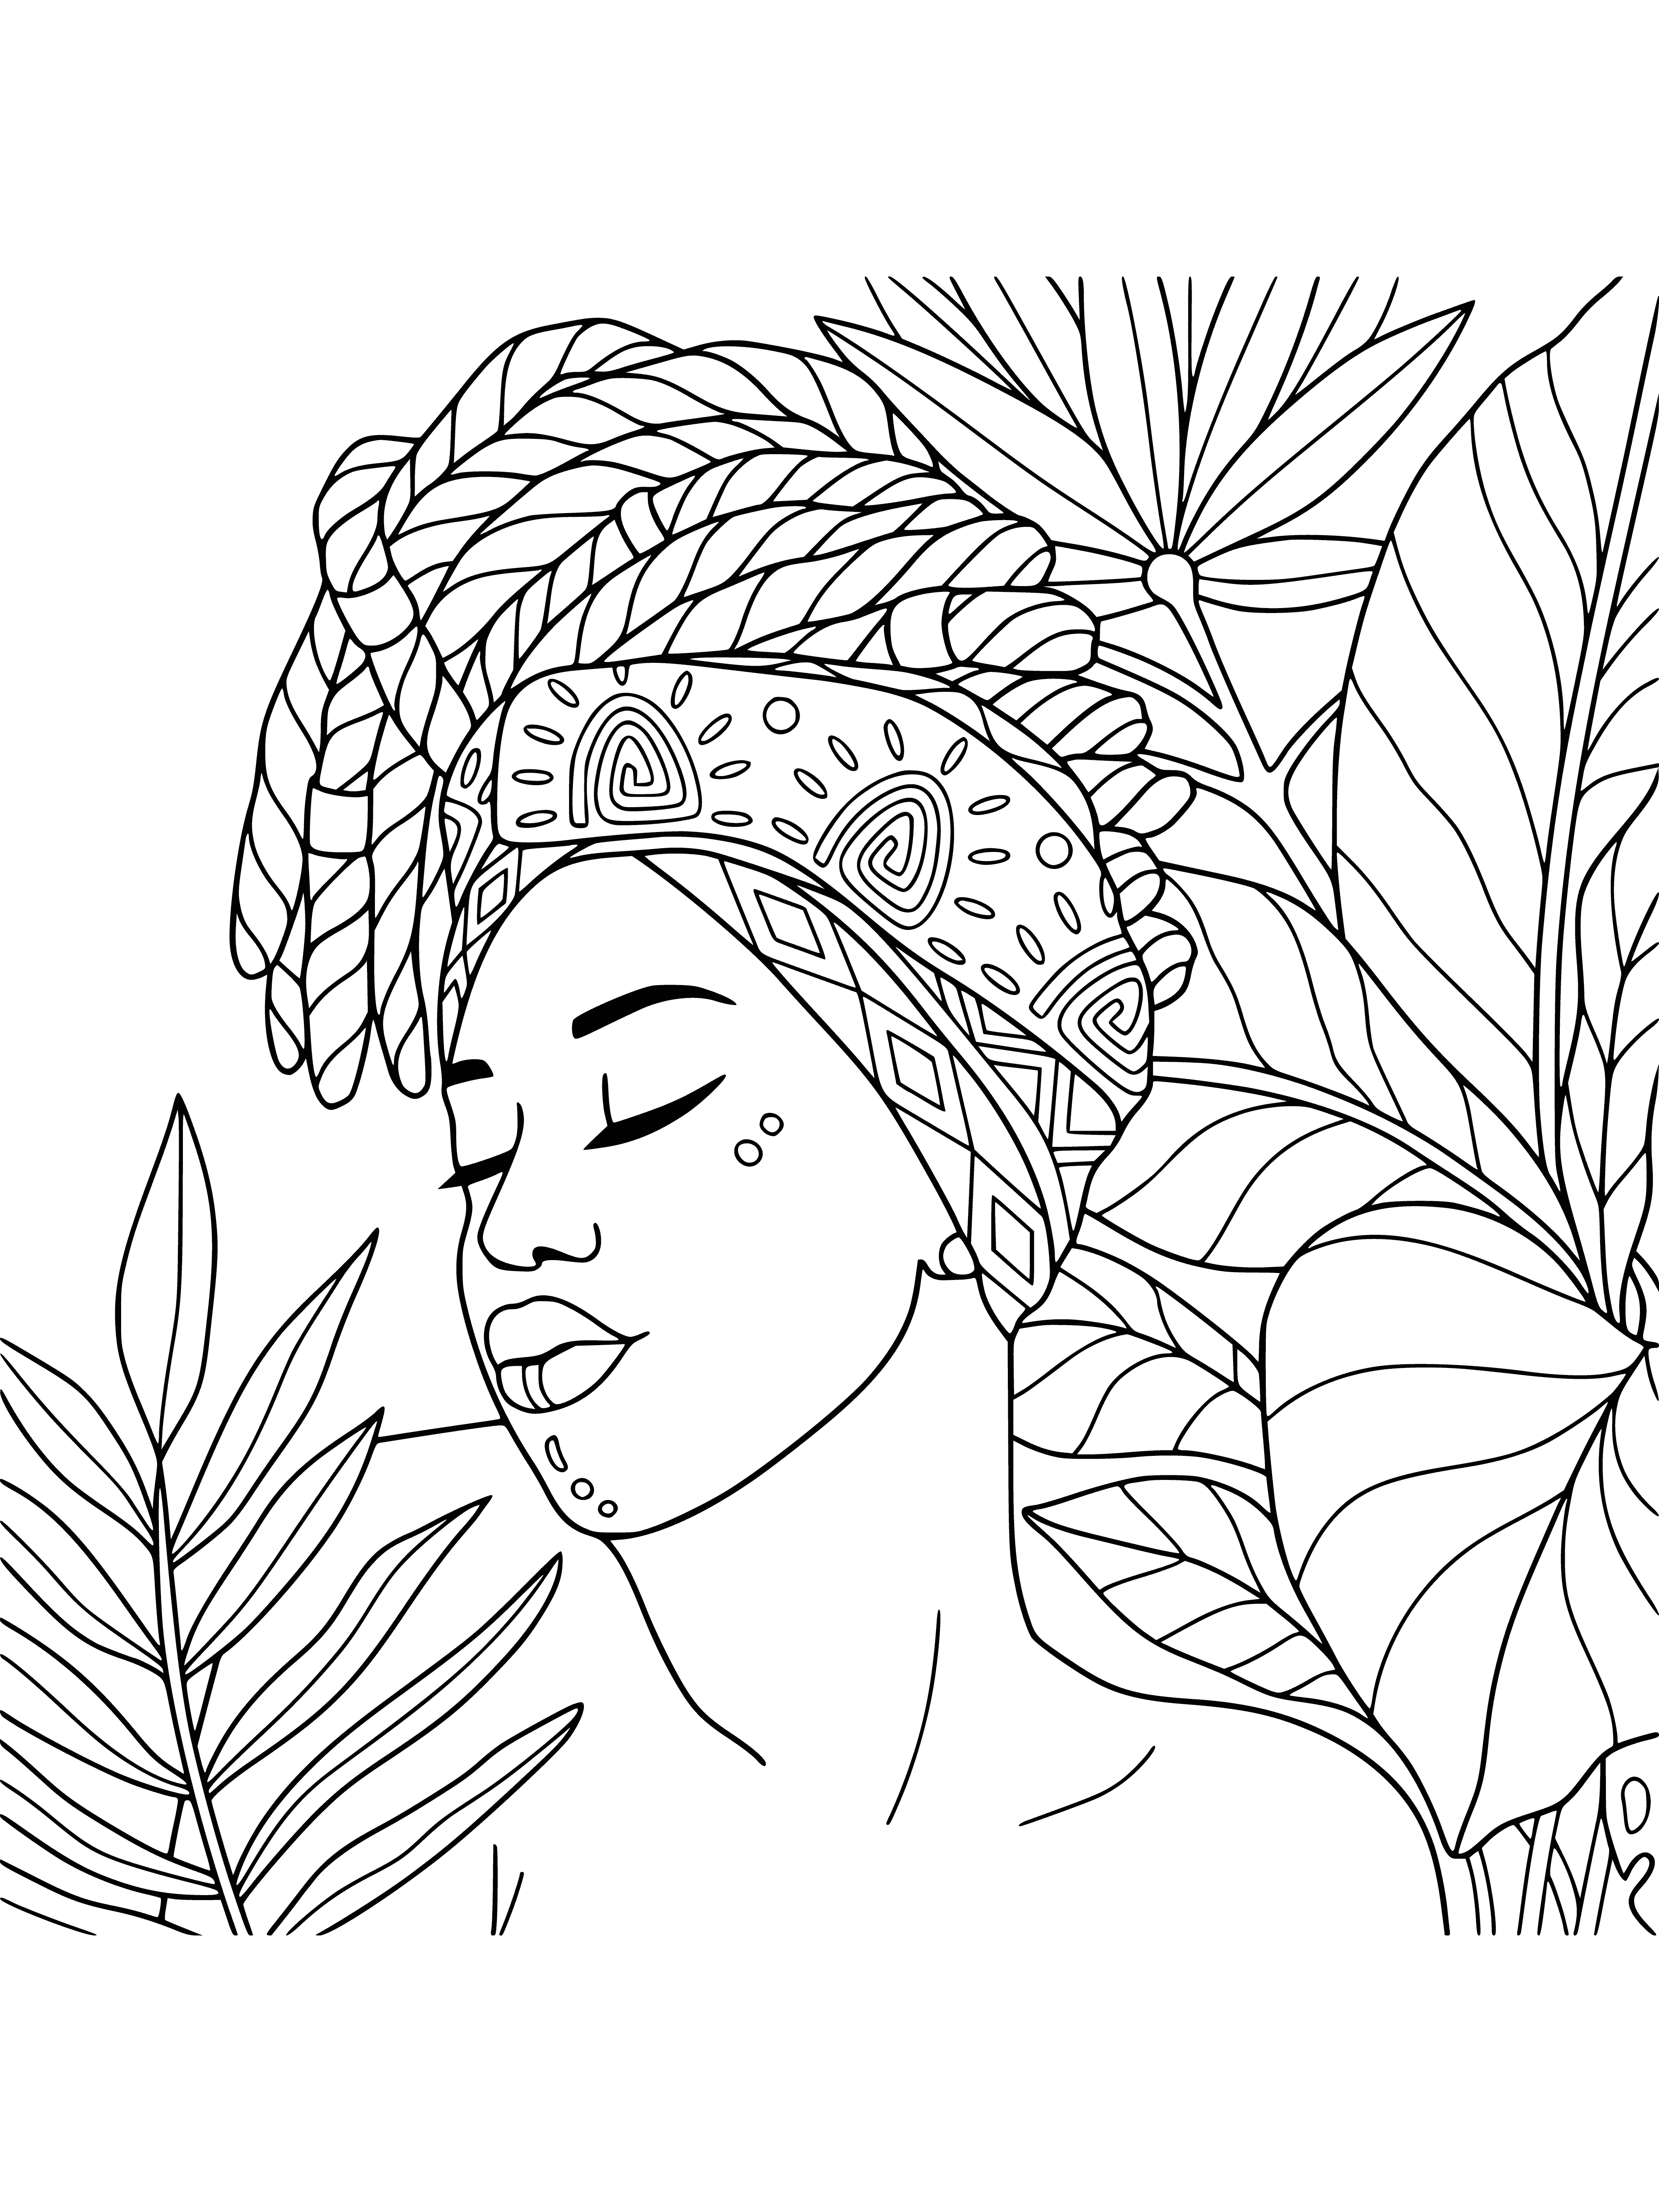 coloring page: #BlackGirlMagic 

3 girls w/ afros having a convo, wearing bright clothes + geometric patterns painted on skin - looking happy & carefree. #BlackGirlMagic